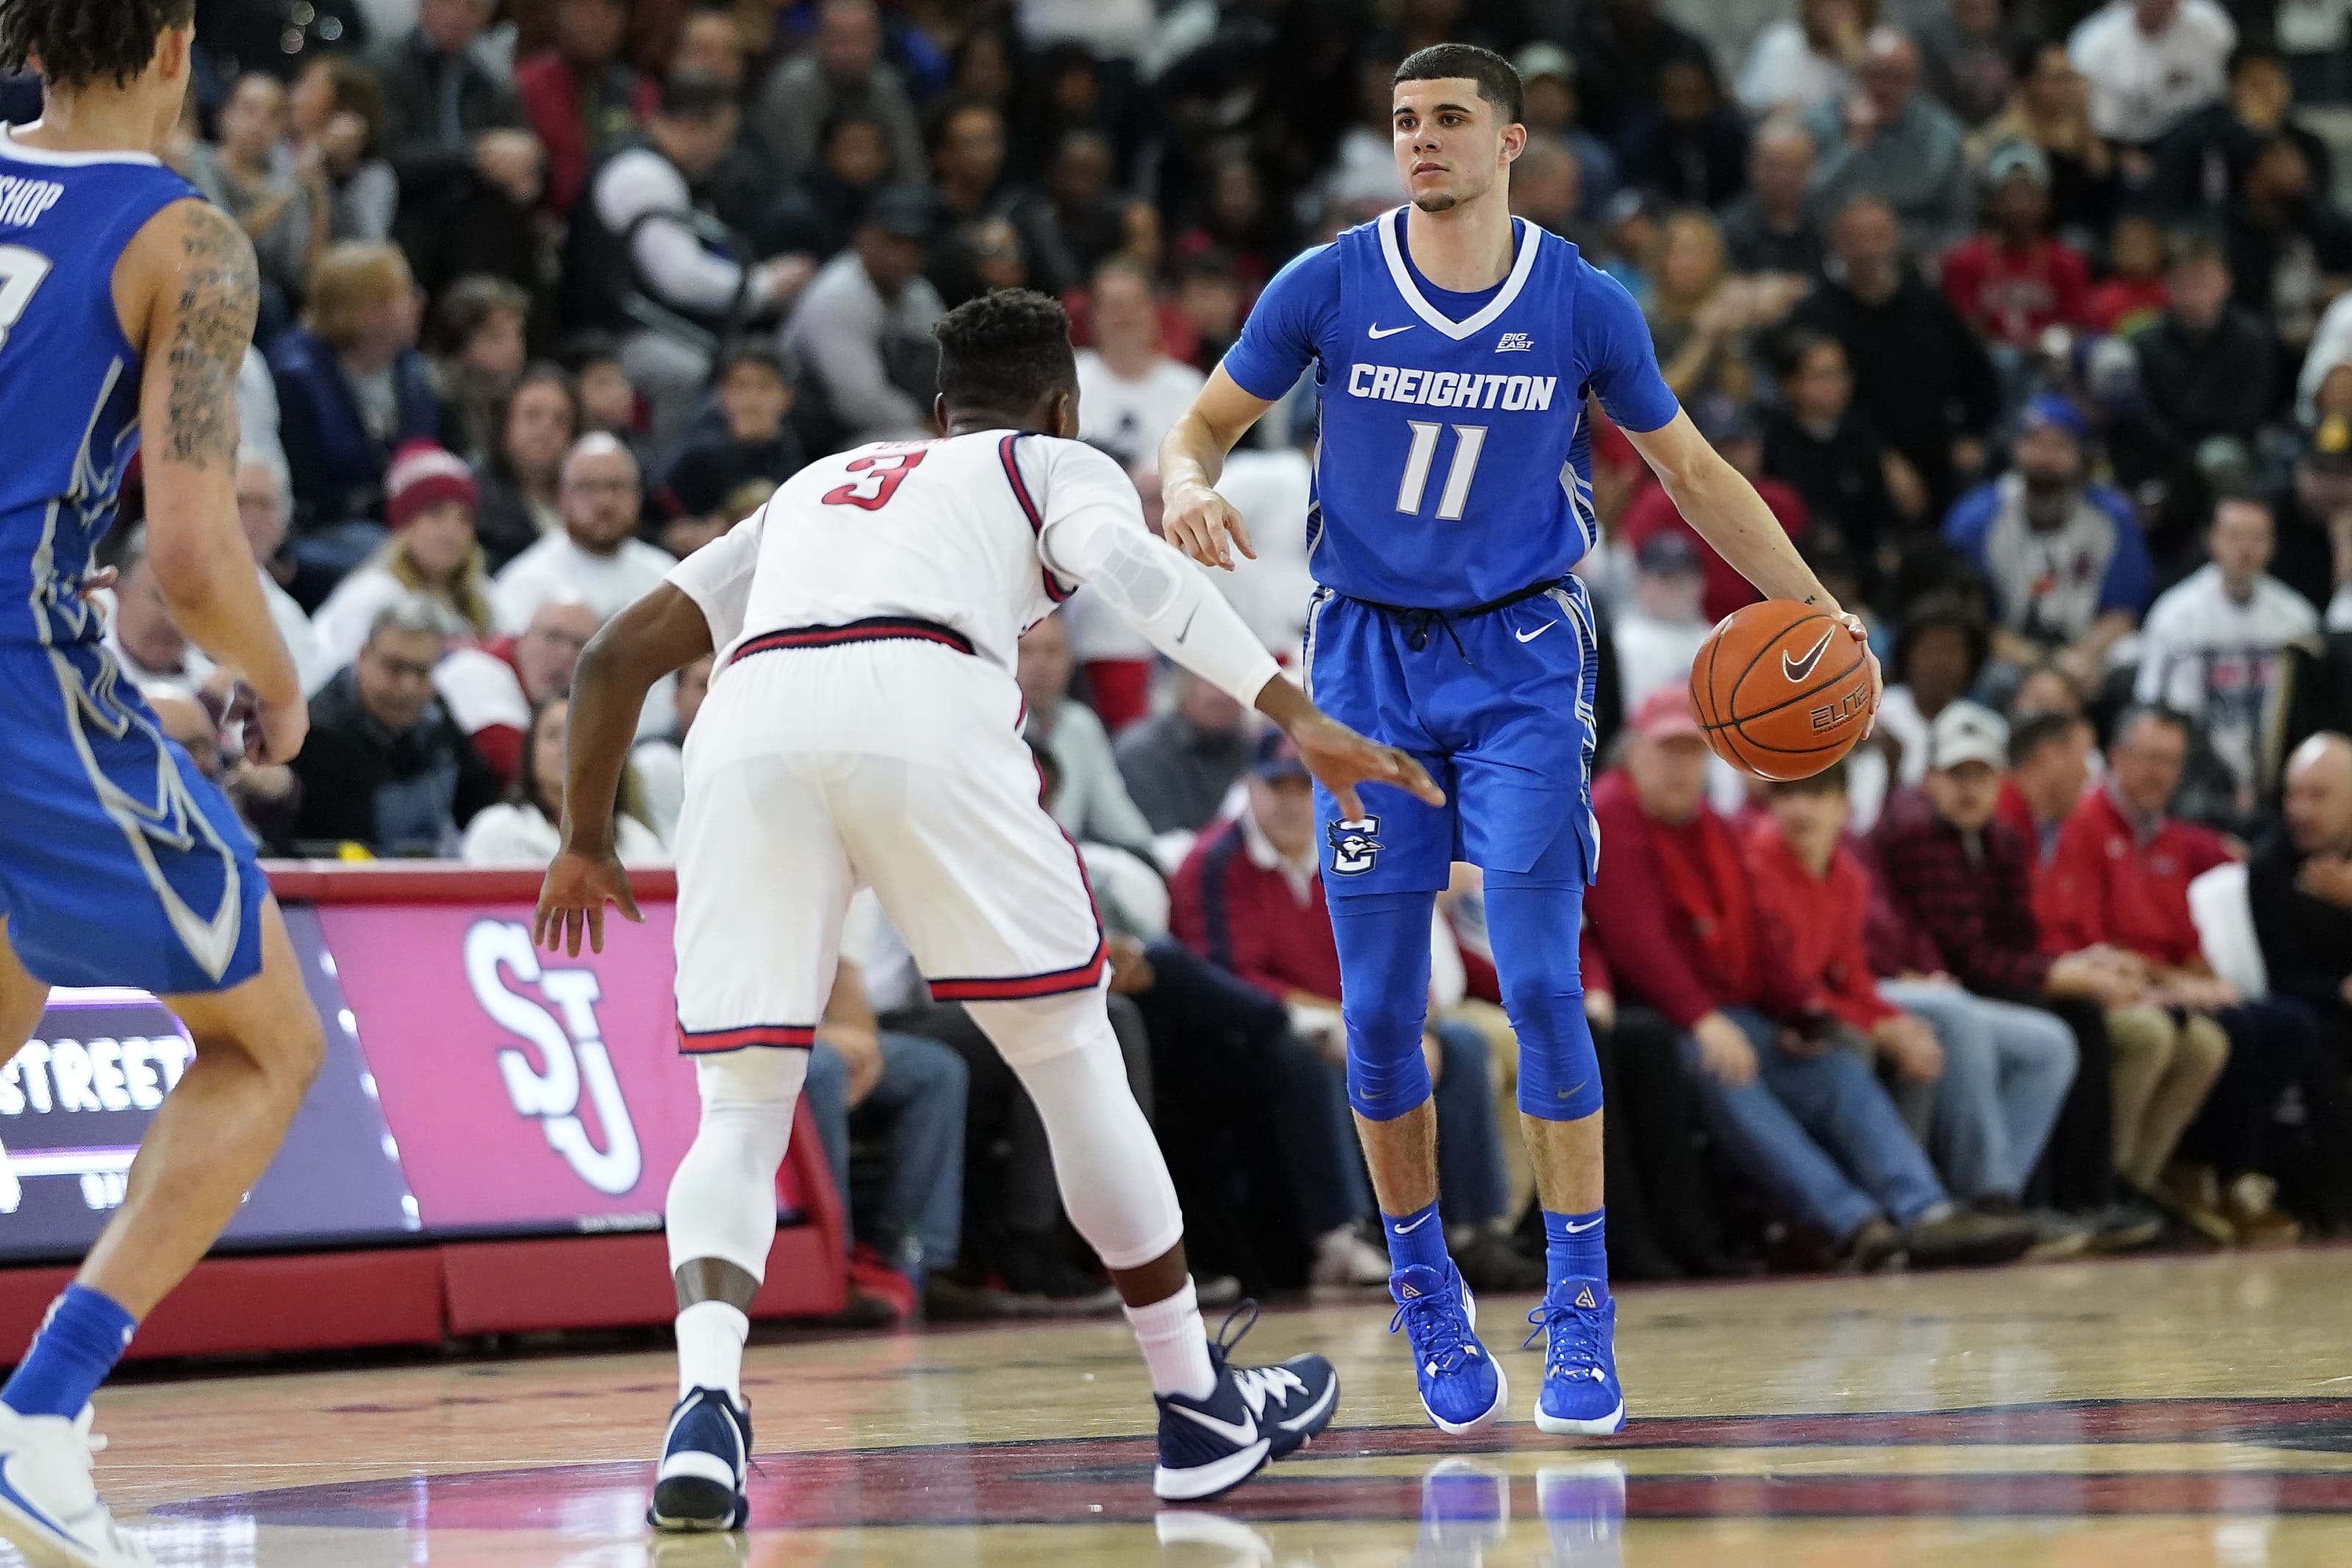 Creighton basketball 201920 season review and 20202021 early preview